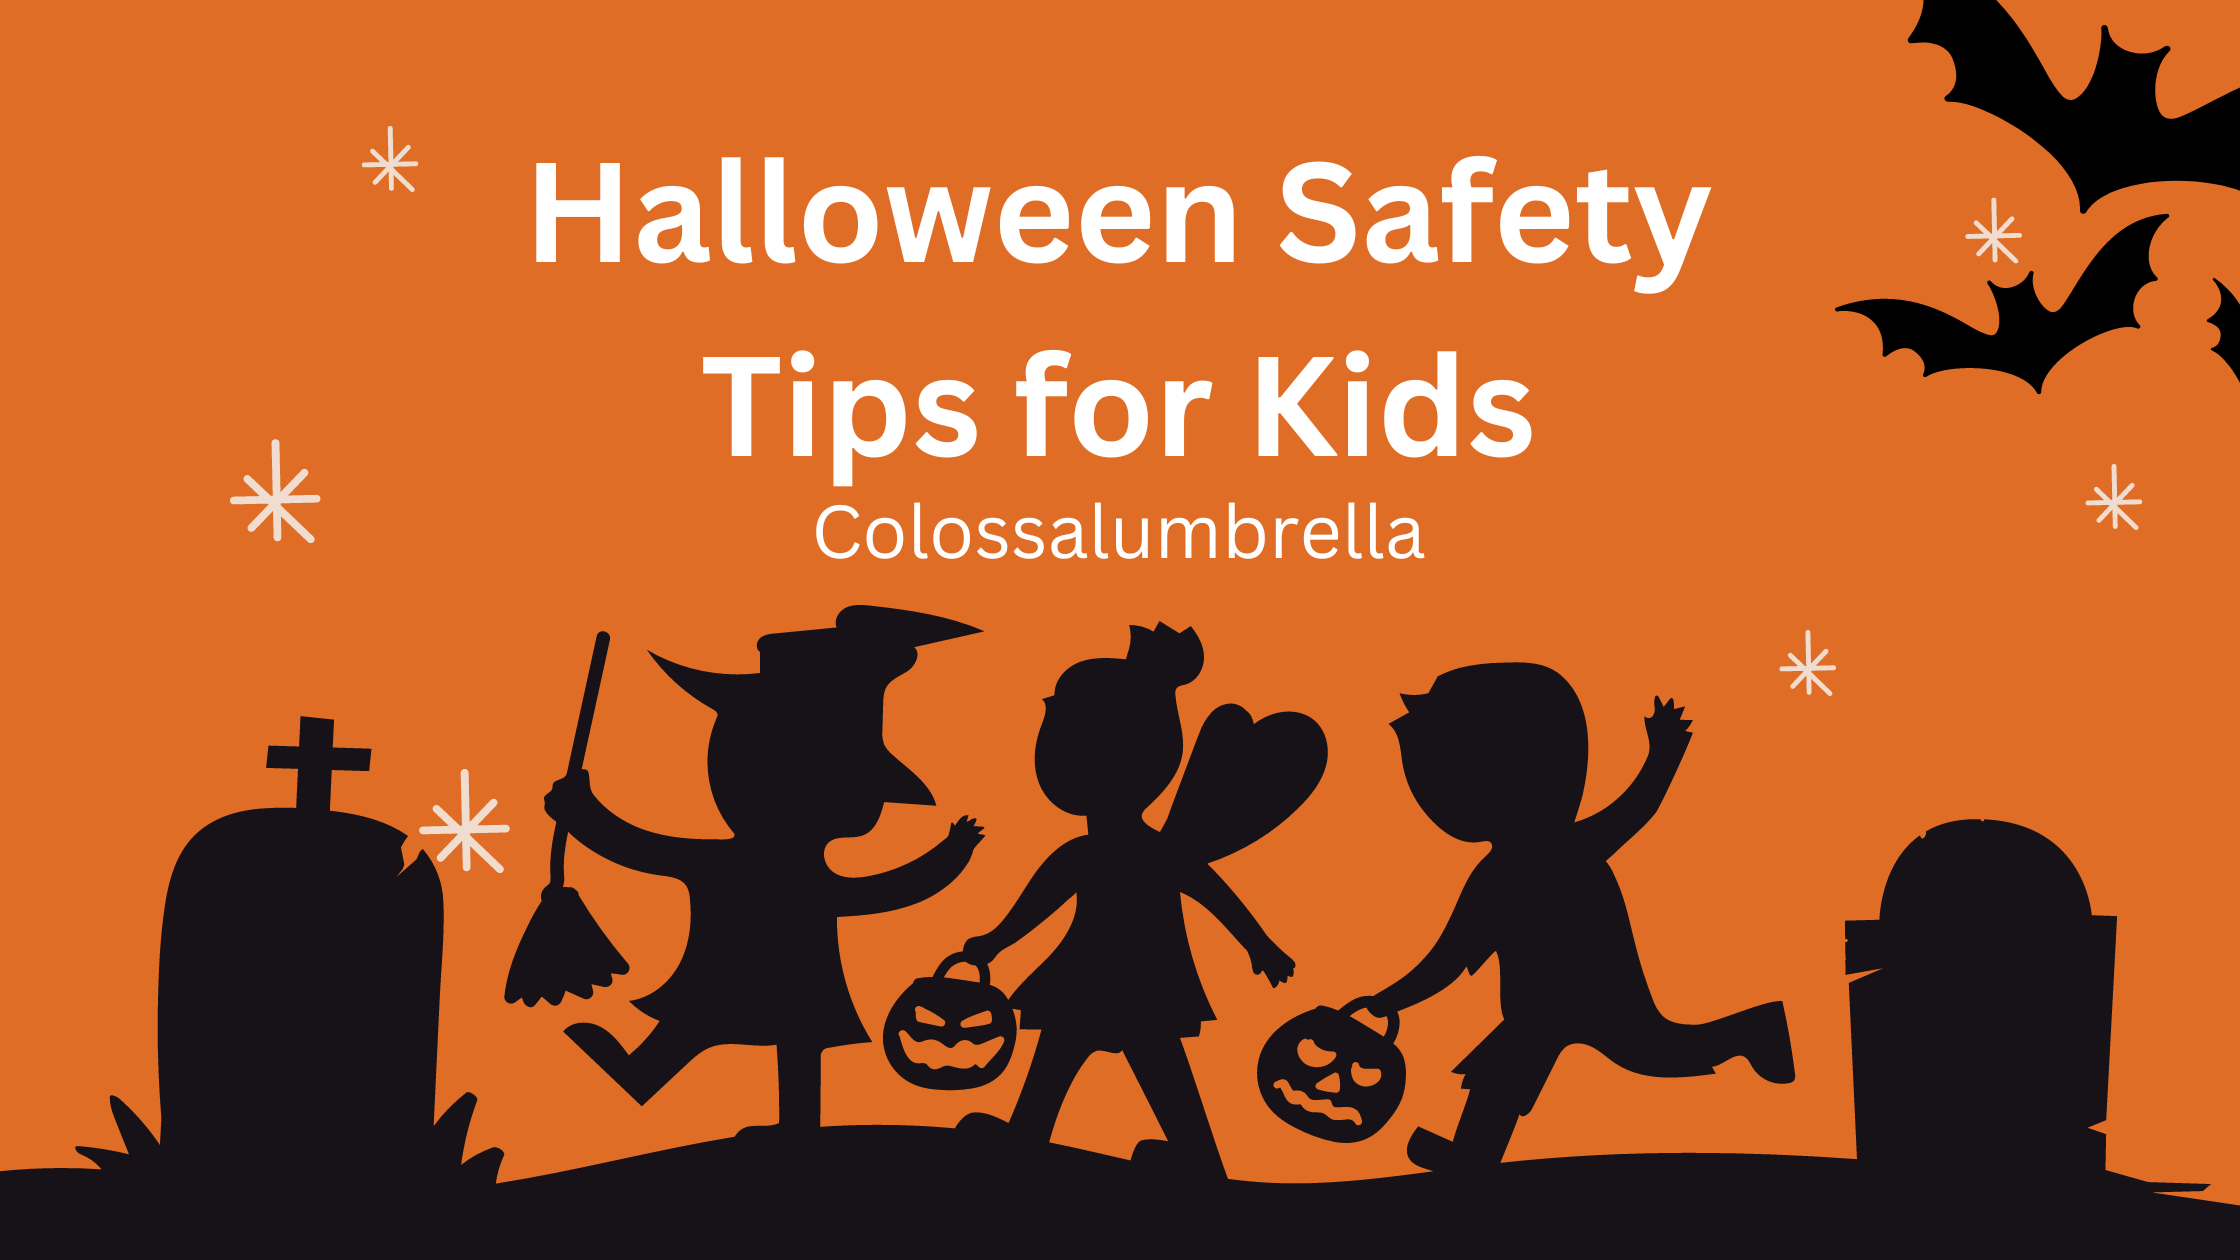 7 Halloween safety tips for kids – Don’t Trick and Treat Yourself Into Danger! (Halloween safety handouts)